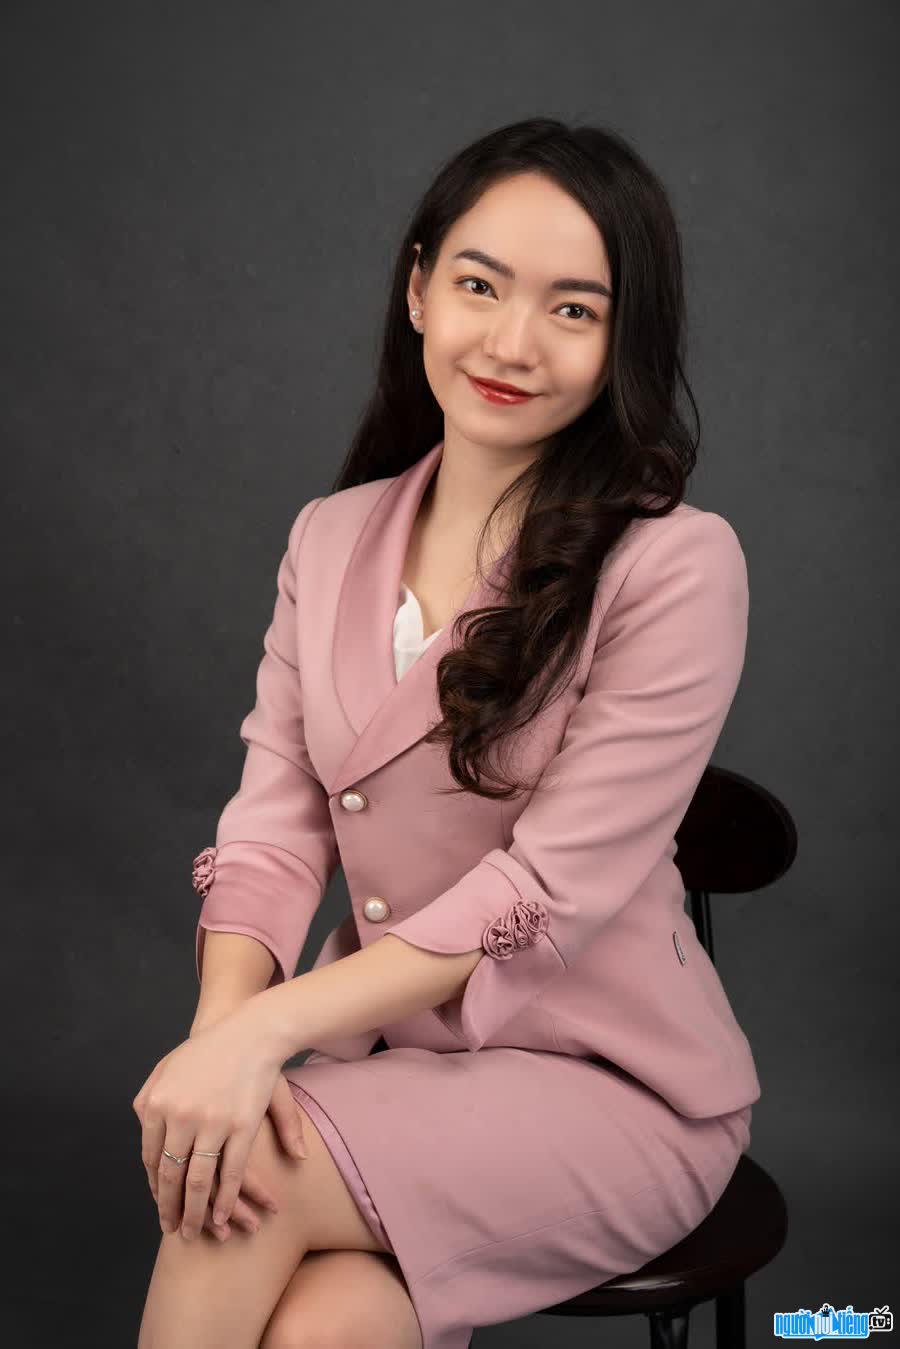 CEO Ngo Thuy Anh is the founder and CEO of 4 startup projects